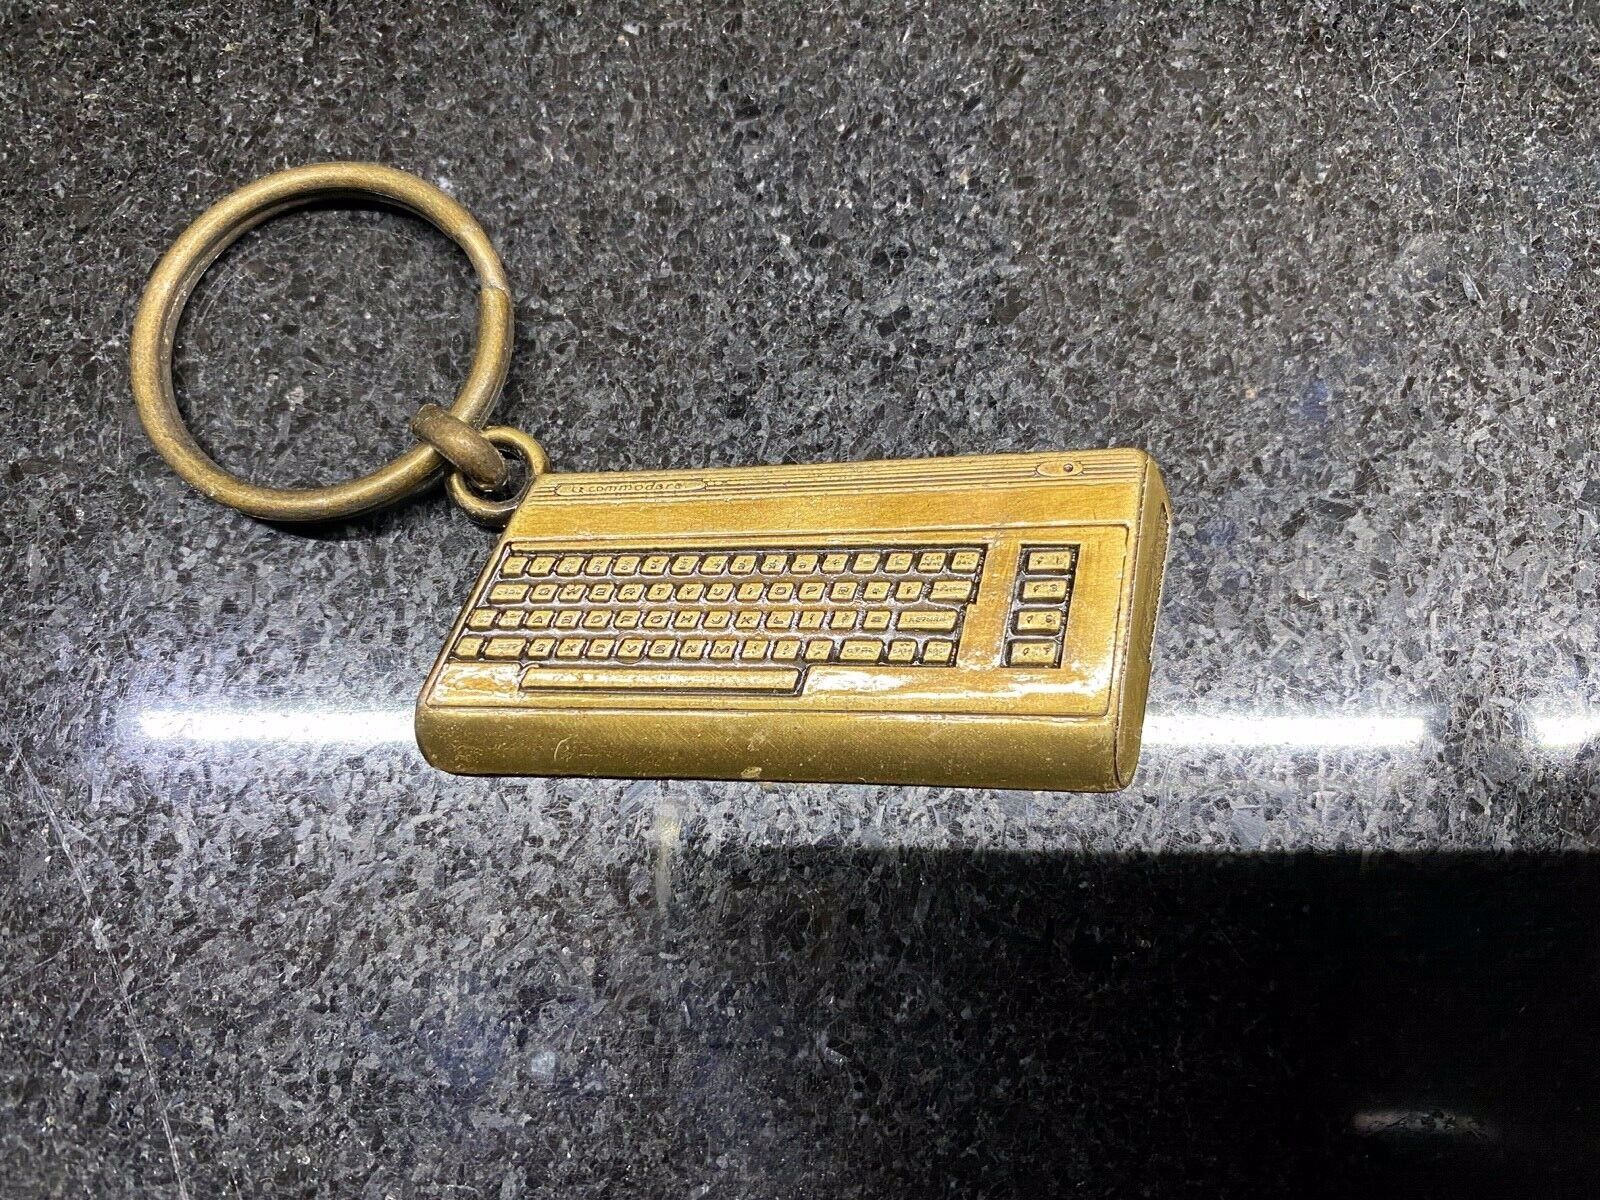 COMMODORE KEYCHAIN -THE ULTIMATE PERSONAL COMPUTER AT THE UNBELIEVABLE PRICE 